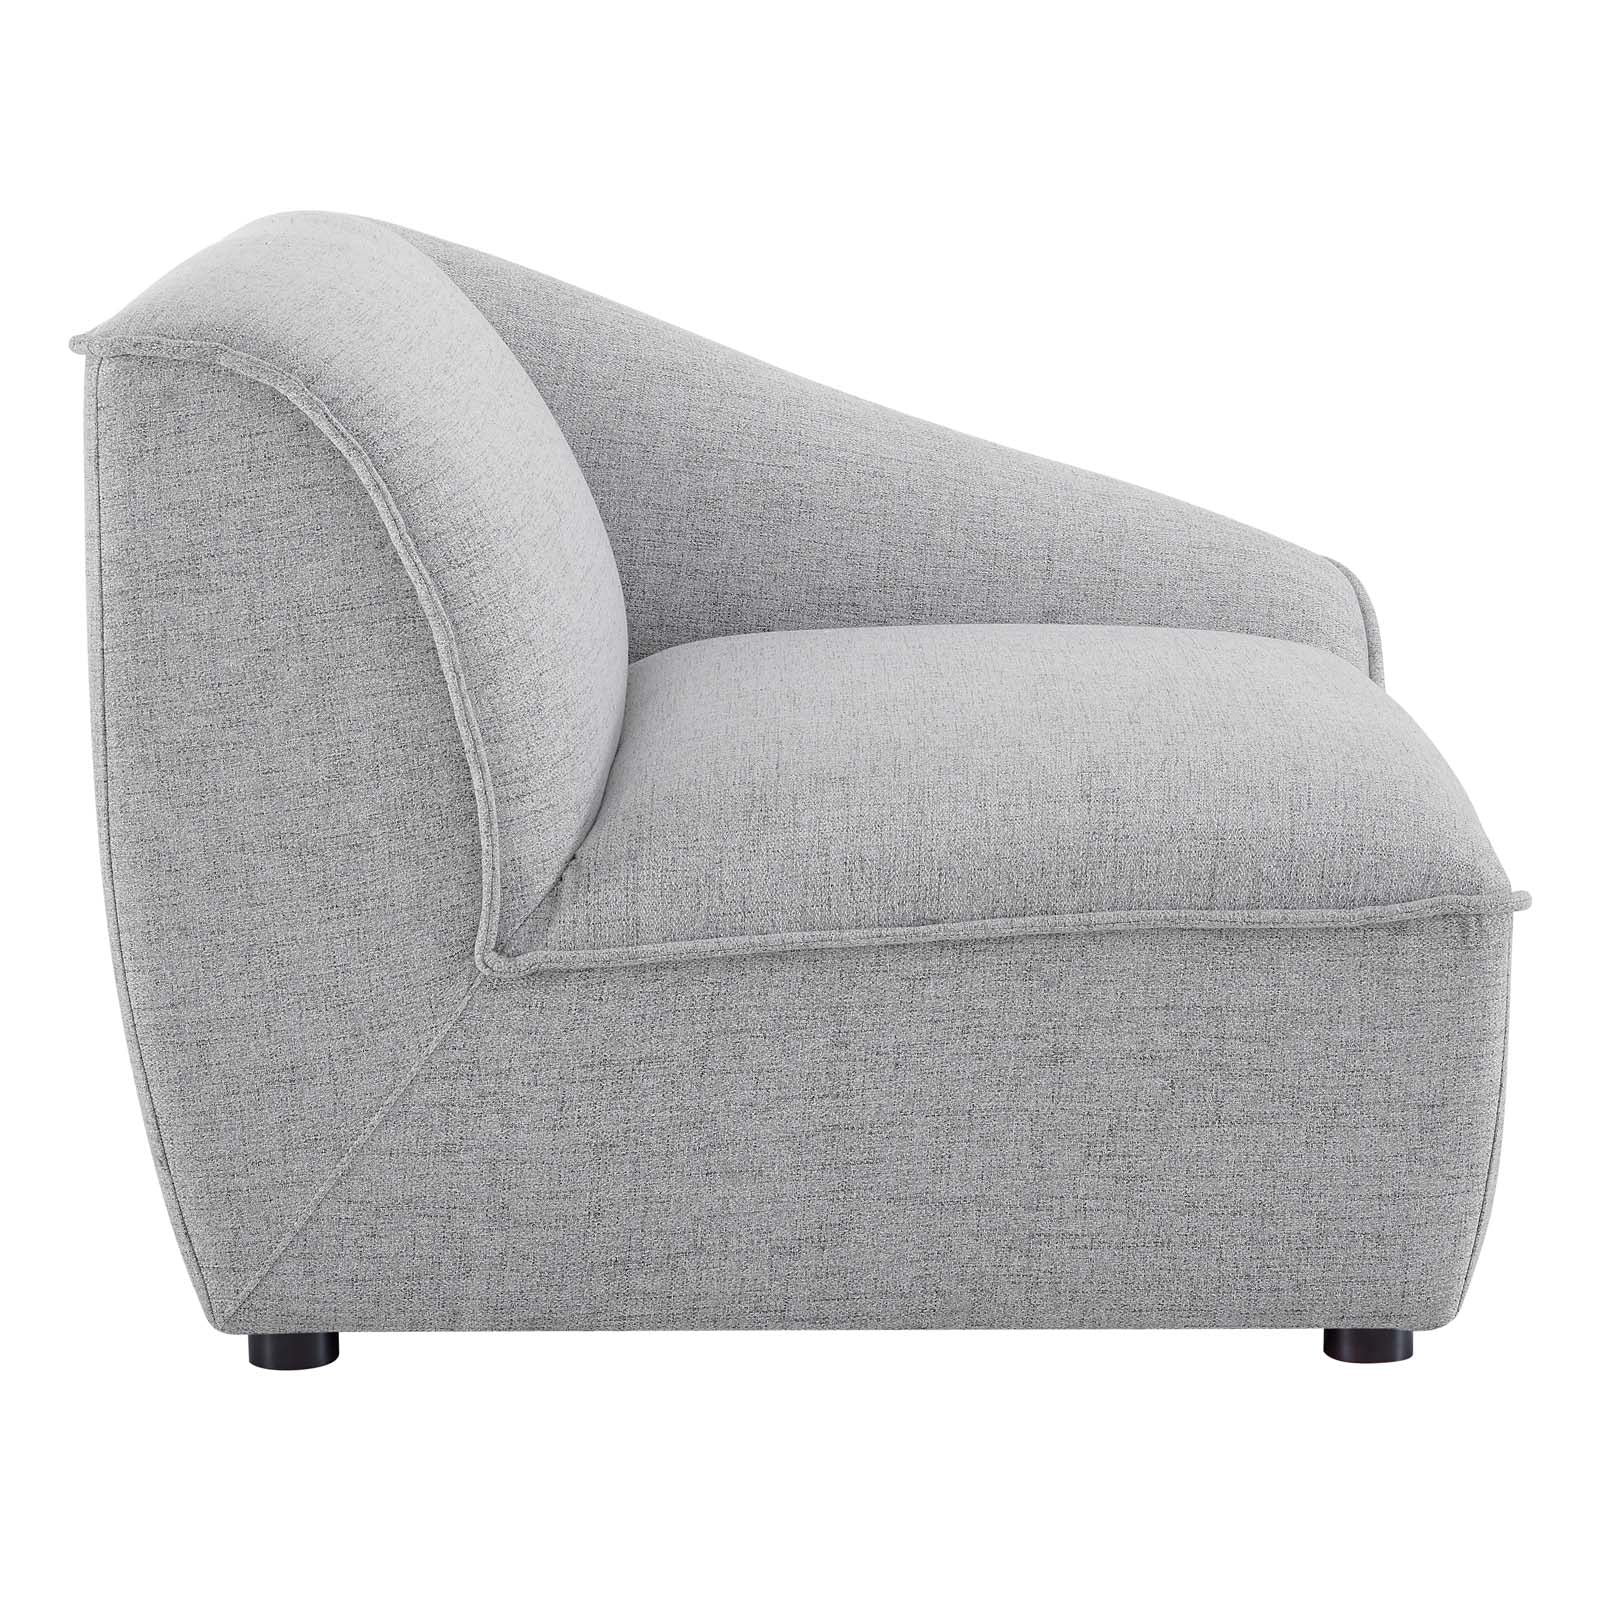 Comprise Right-Arm Sectional Sofa Chair - East Shore Modern Home Furnishings